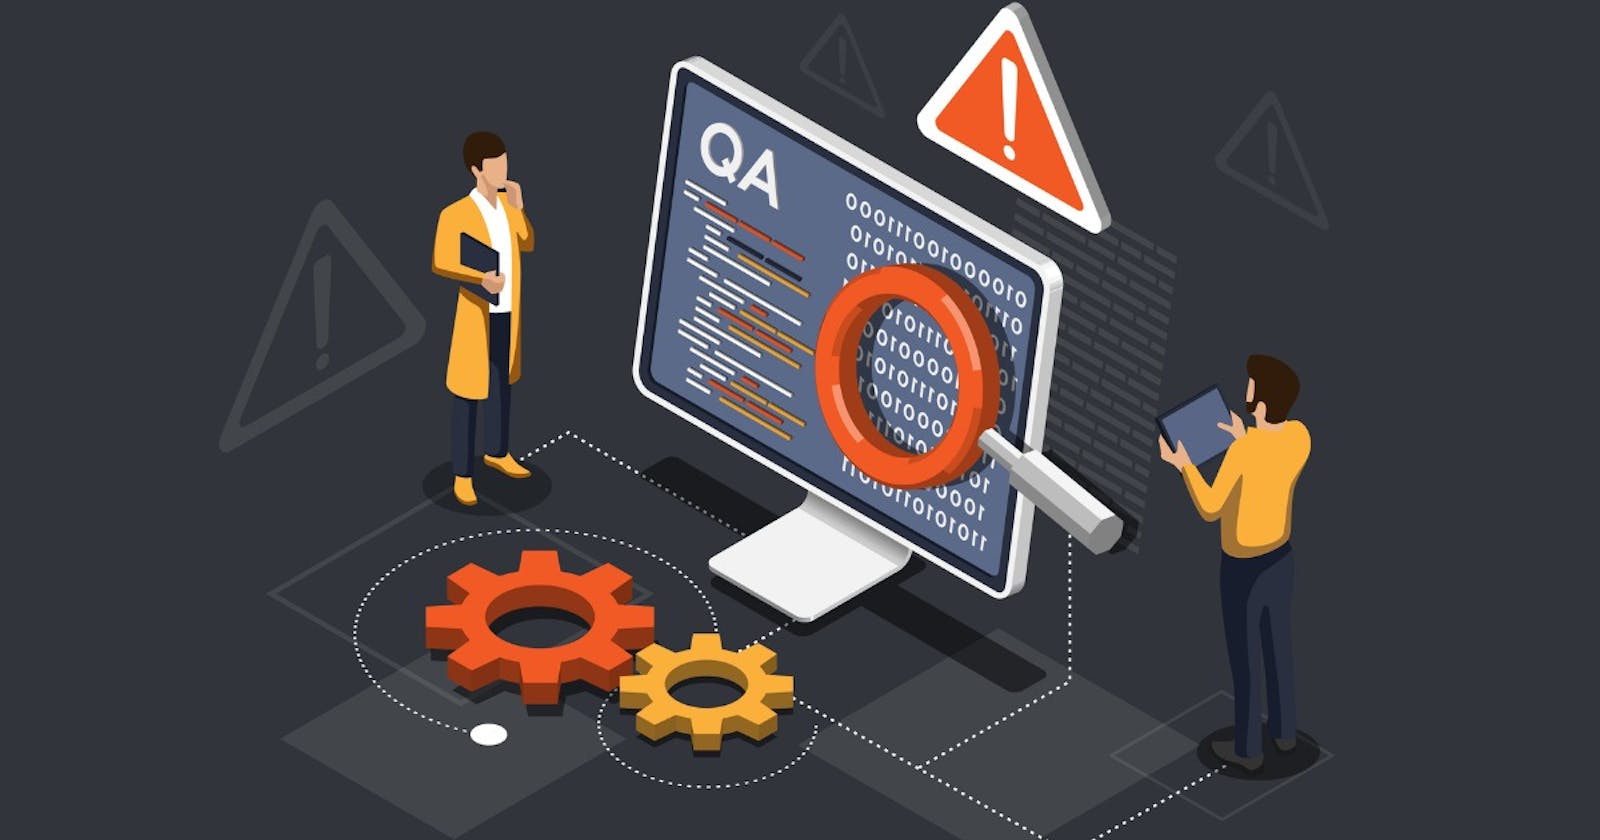 A Comprehensive Online Course for Quality Software Development